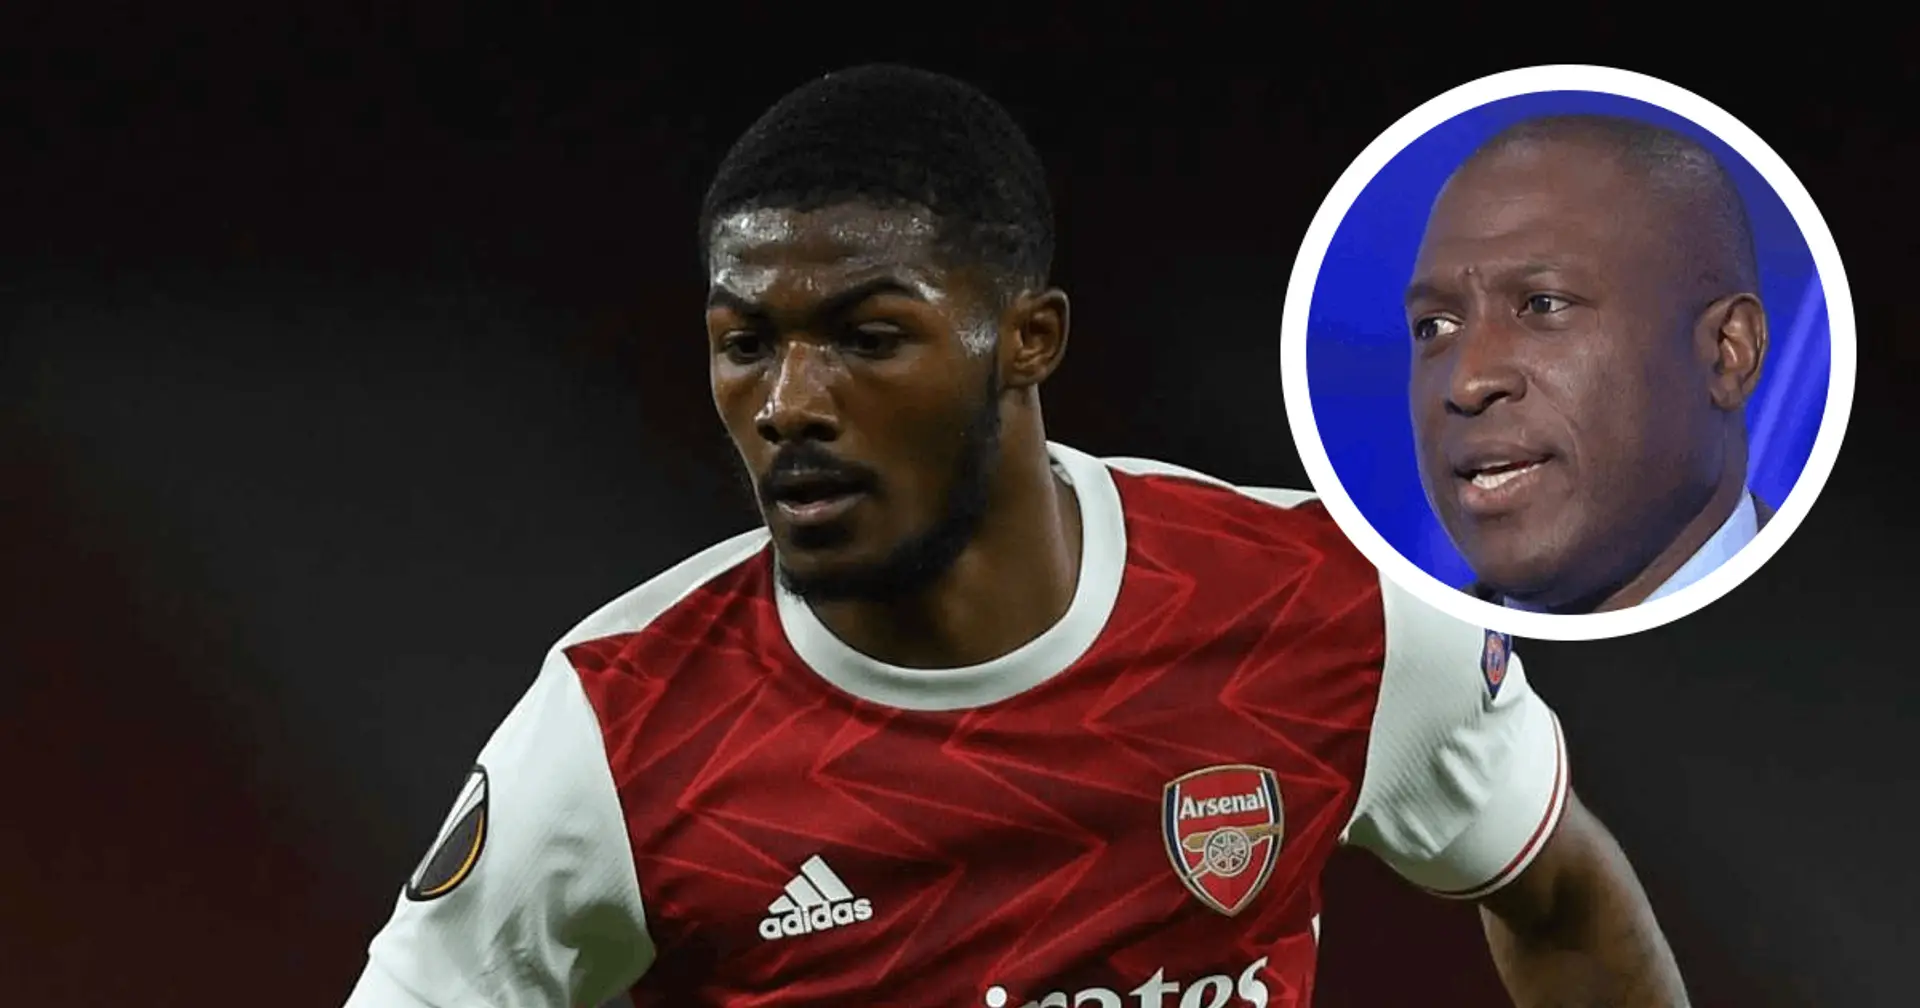 Kevin Campbell: Arsenal should sell Maitland-Niles as Mikel Arteta doesn't trust him as a midfielder